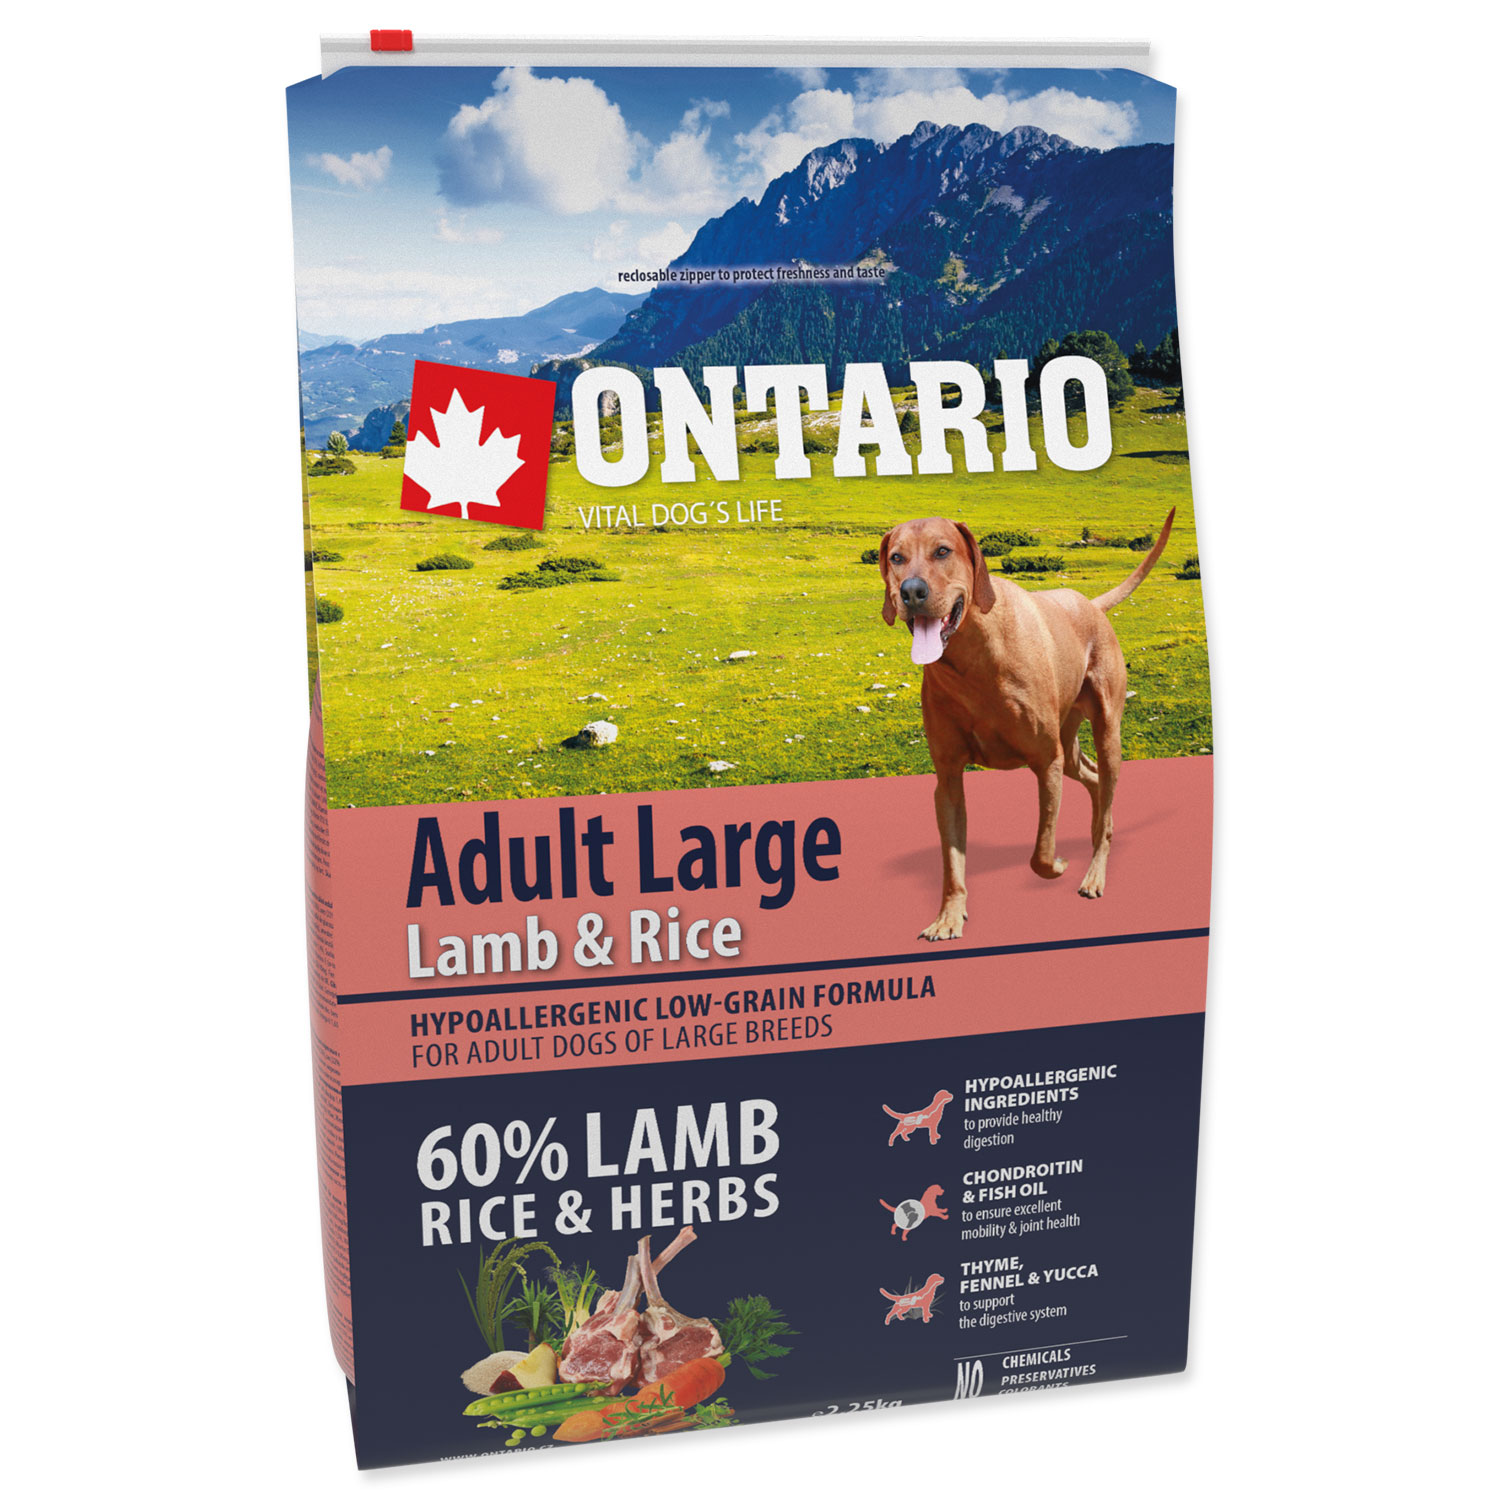 ONTARIO Dog Adult Large Chicken & Potatoes & Herbs 2,25 kg